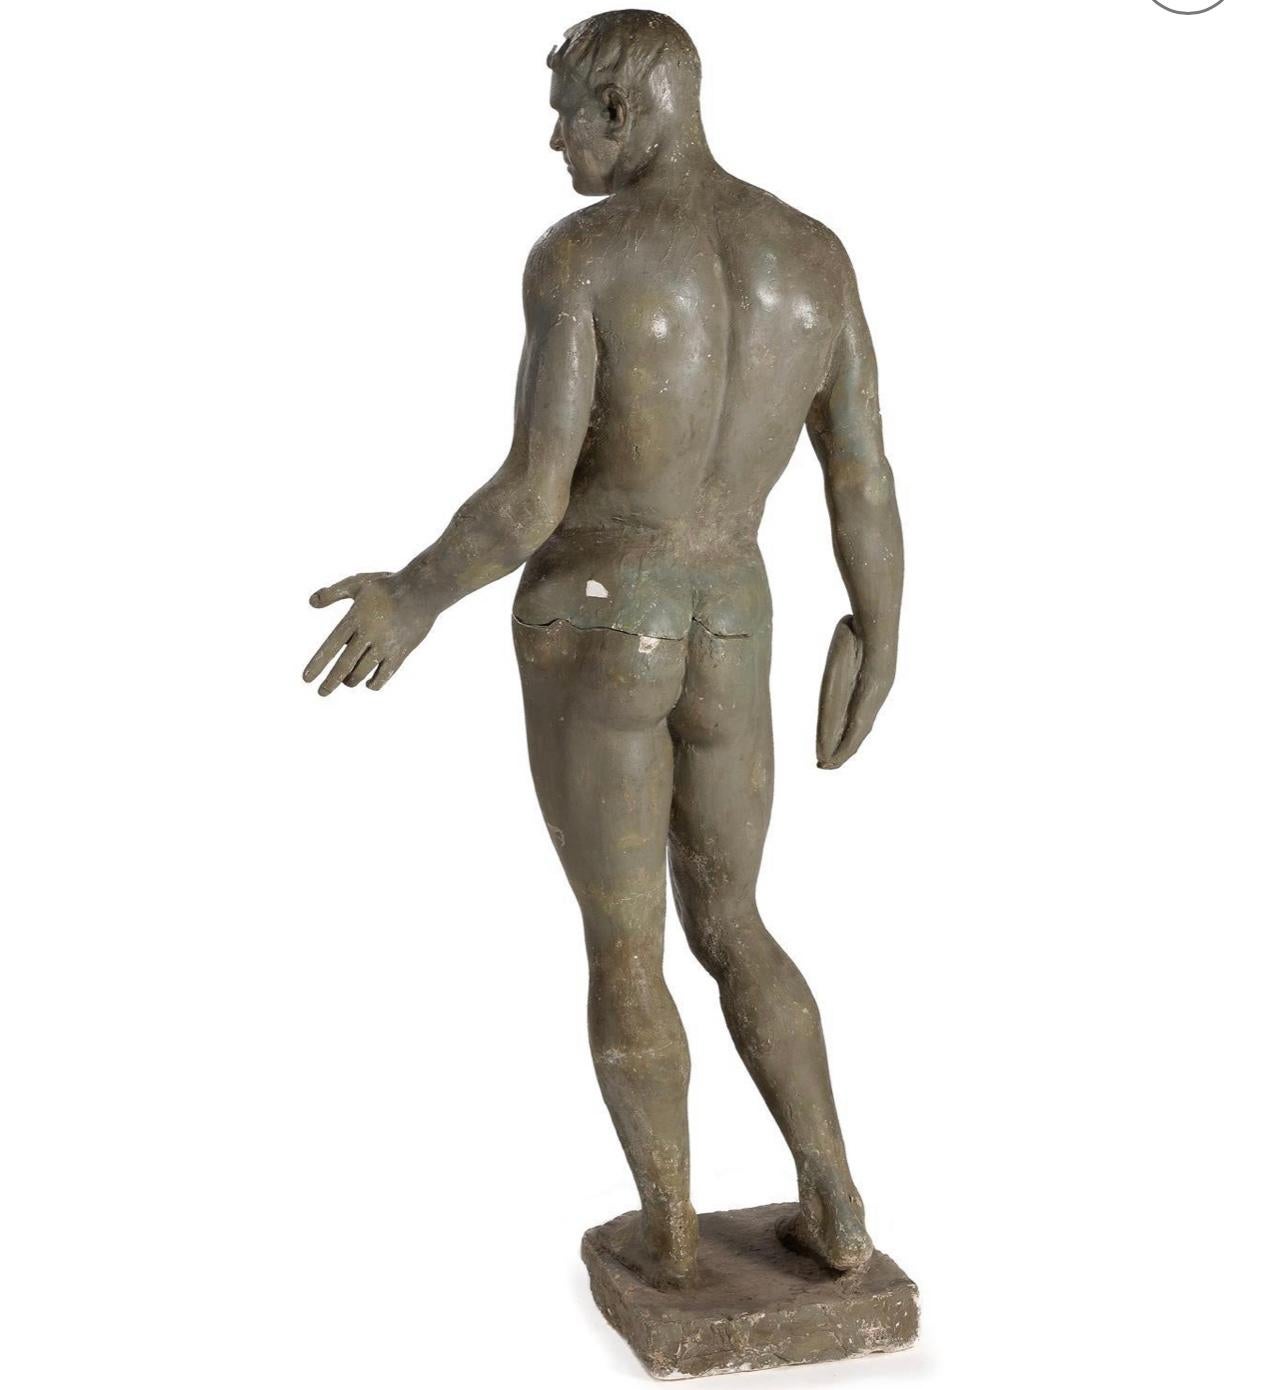 Attributed to Jean Rene Gauguin (French-danish, 1881-1961), the discus thrower Copenhagen, Circa 1926-1927 
A lifesize sculpted and painted plaster statue figure on integral plinth (195cm high) . More than likely a maquette.

The son of Paul